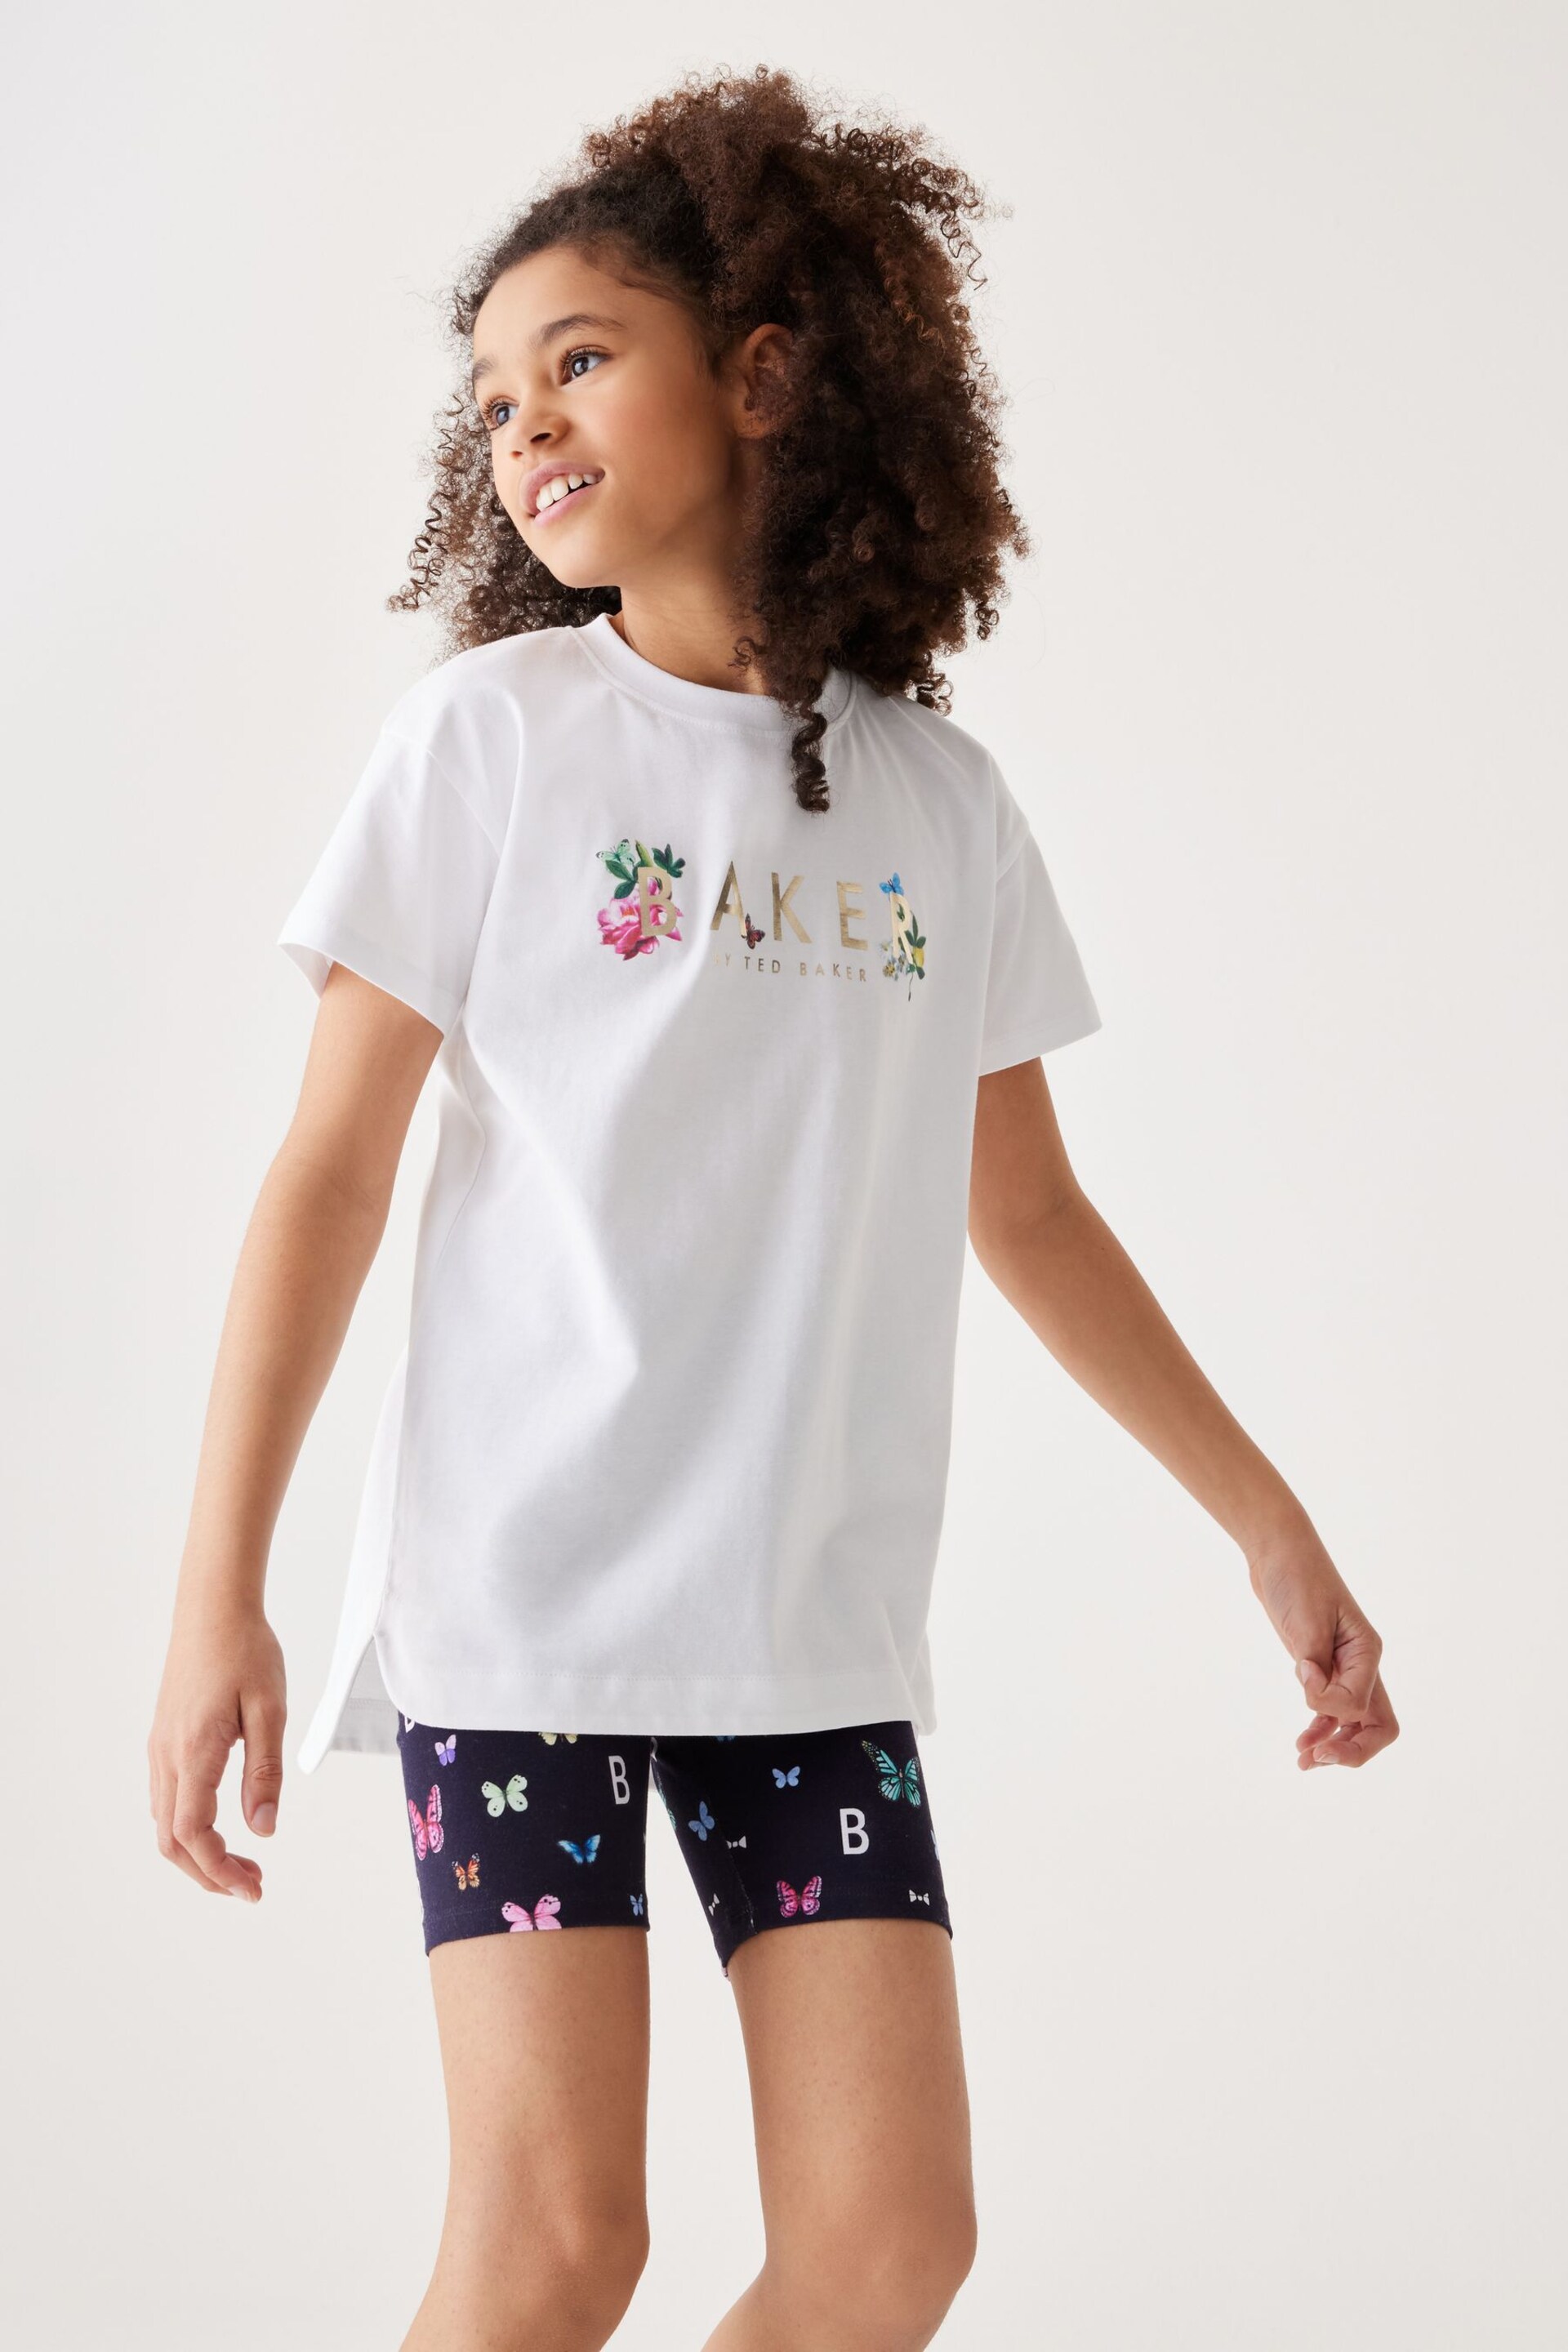 Baker by Ted Baker Navy Butterfly T-Shirt And Cycling Shorts Set - Image 1 of 5